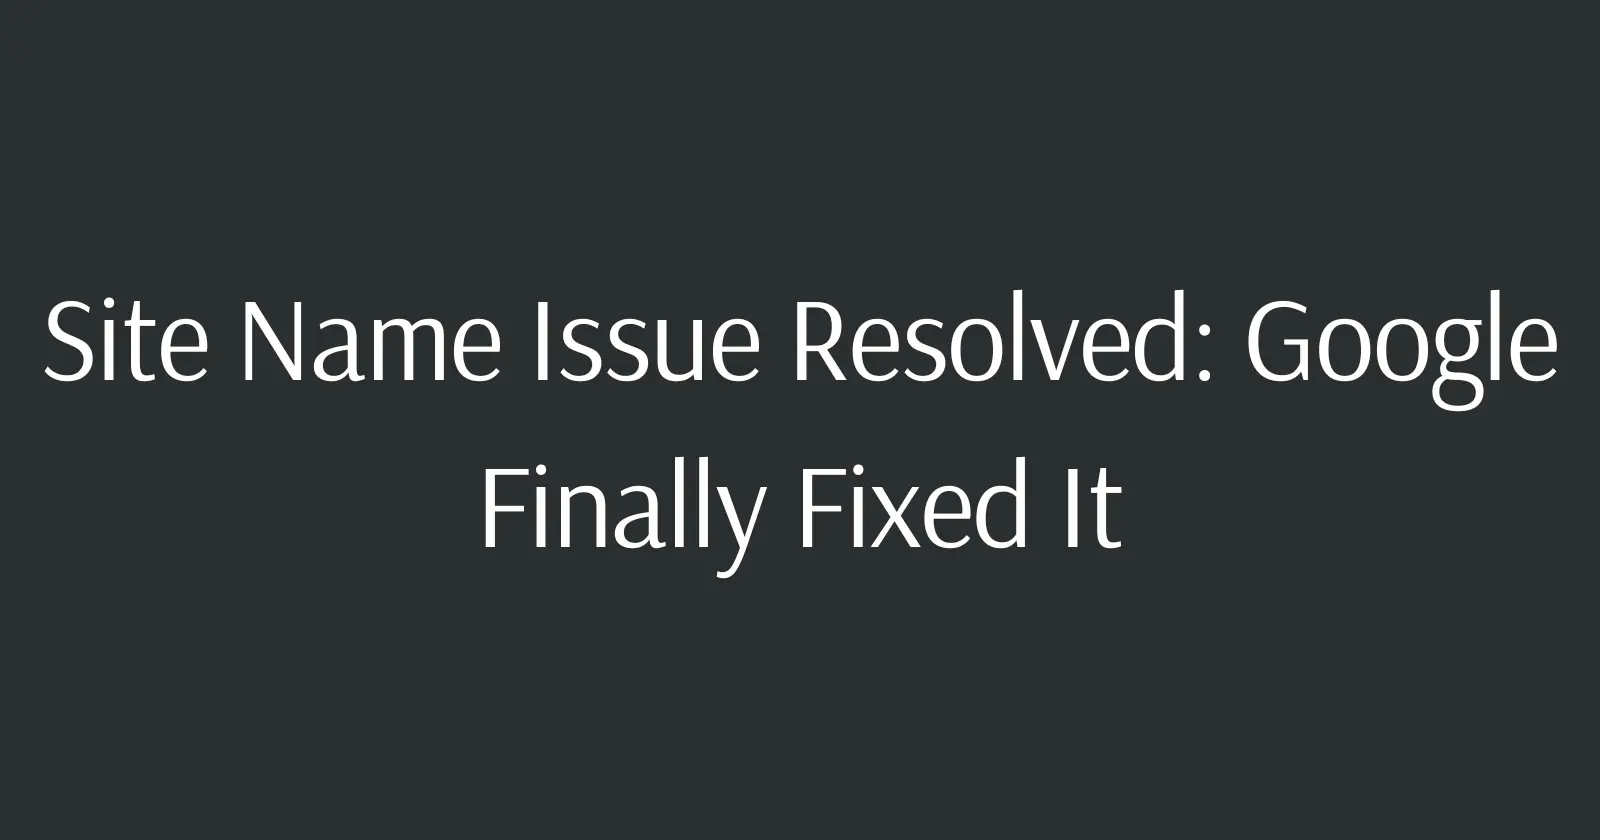 Site Name Issue Resolved: Google Finally Fixed It